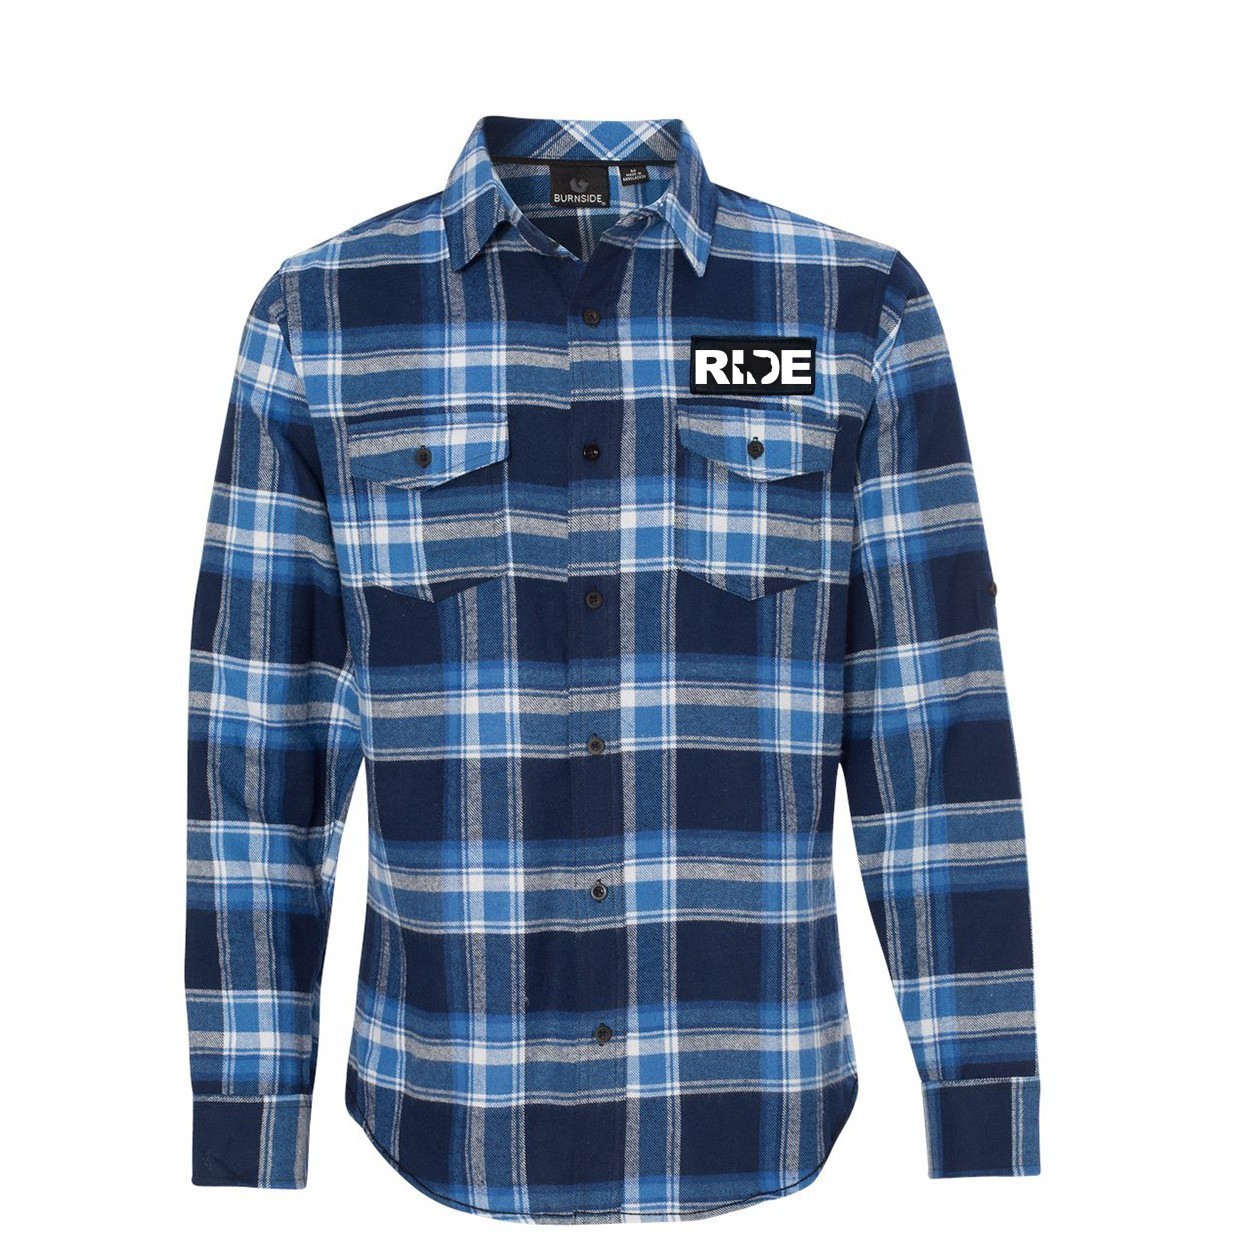 Ride Texas Classic Unisex Long Sleeve Woven Patch Flannel Shirt Blue/White (White Logo)